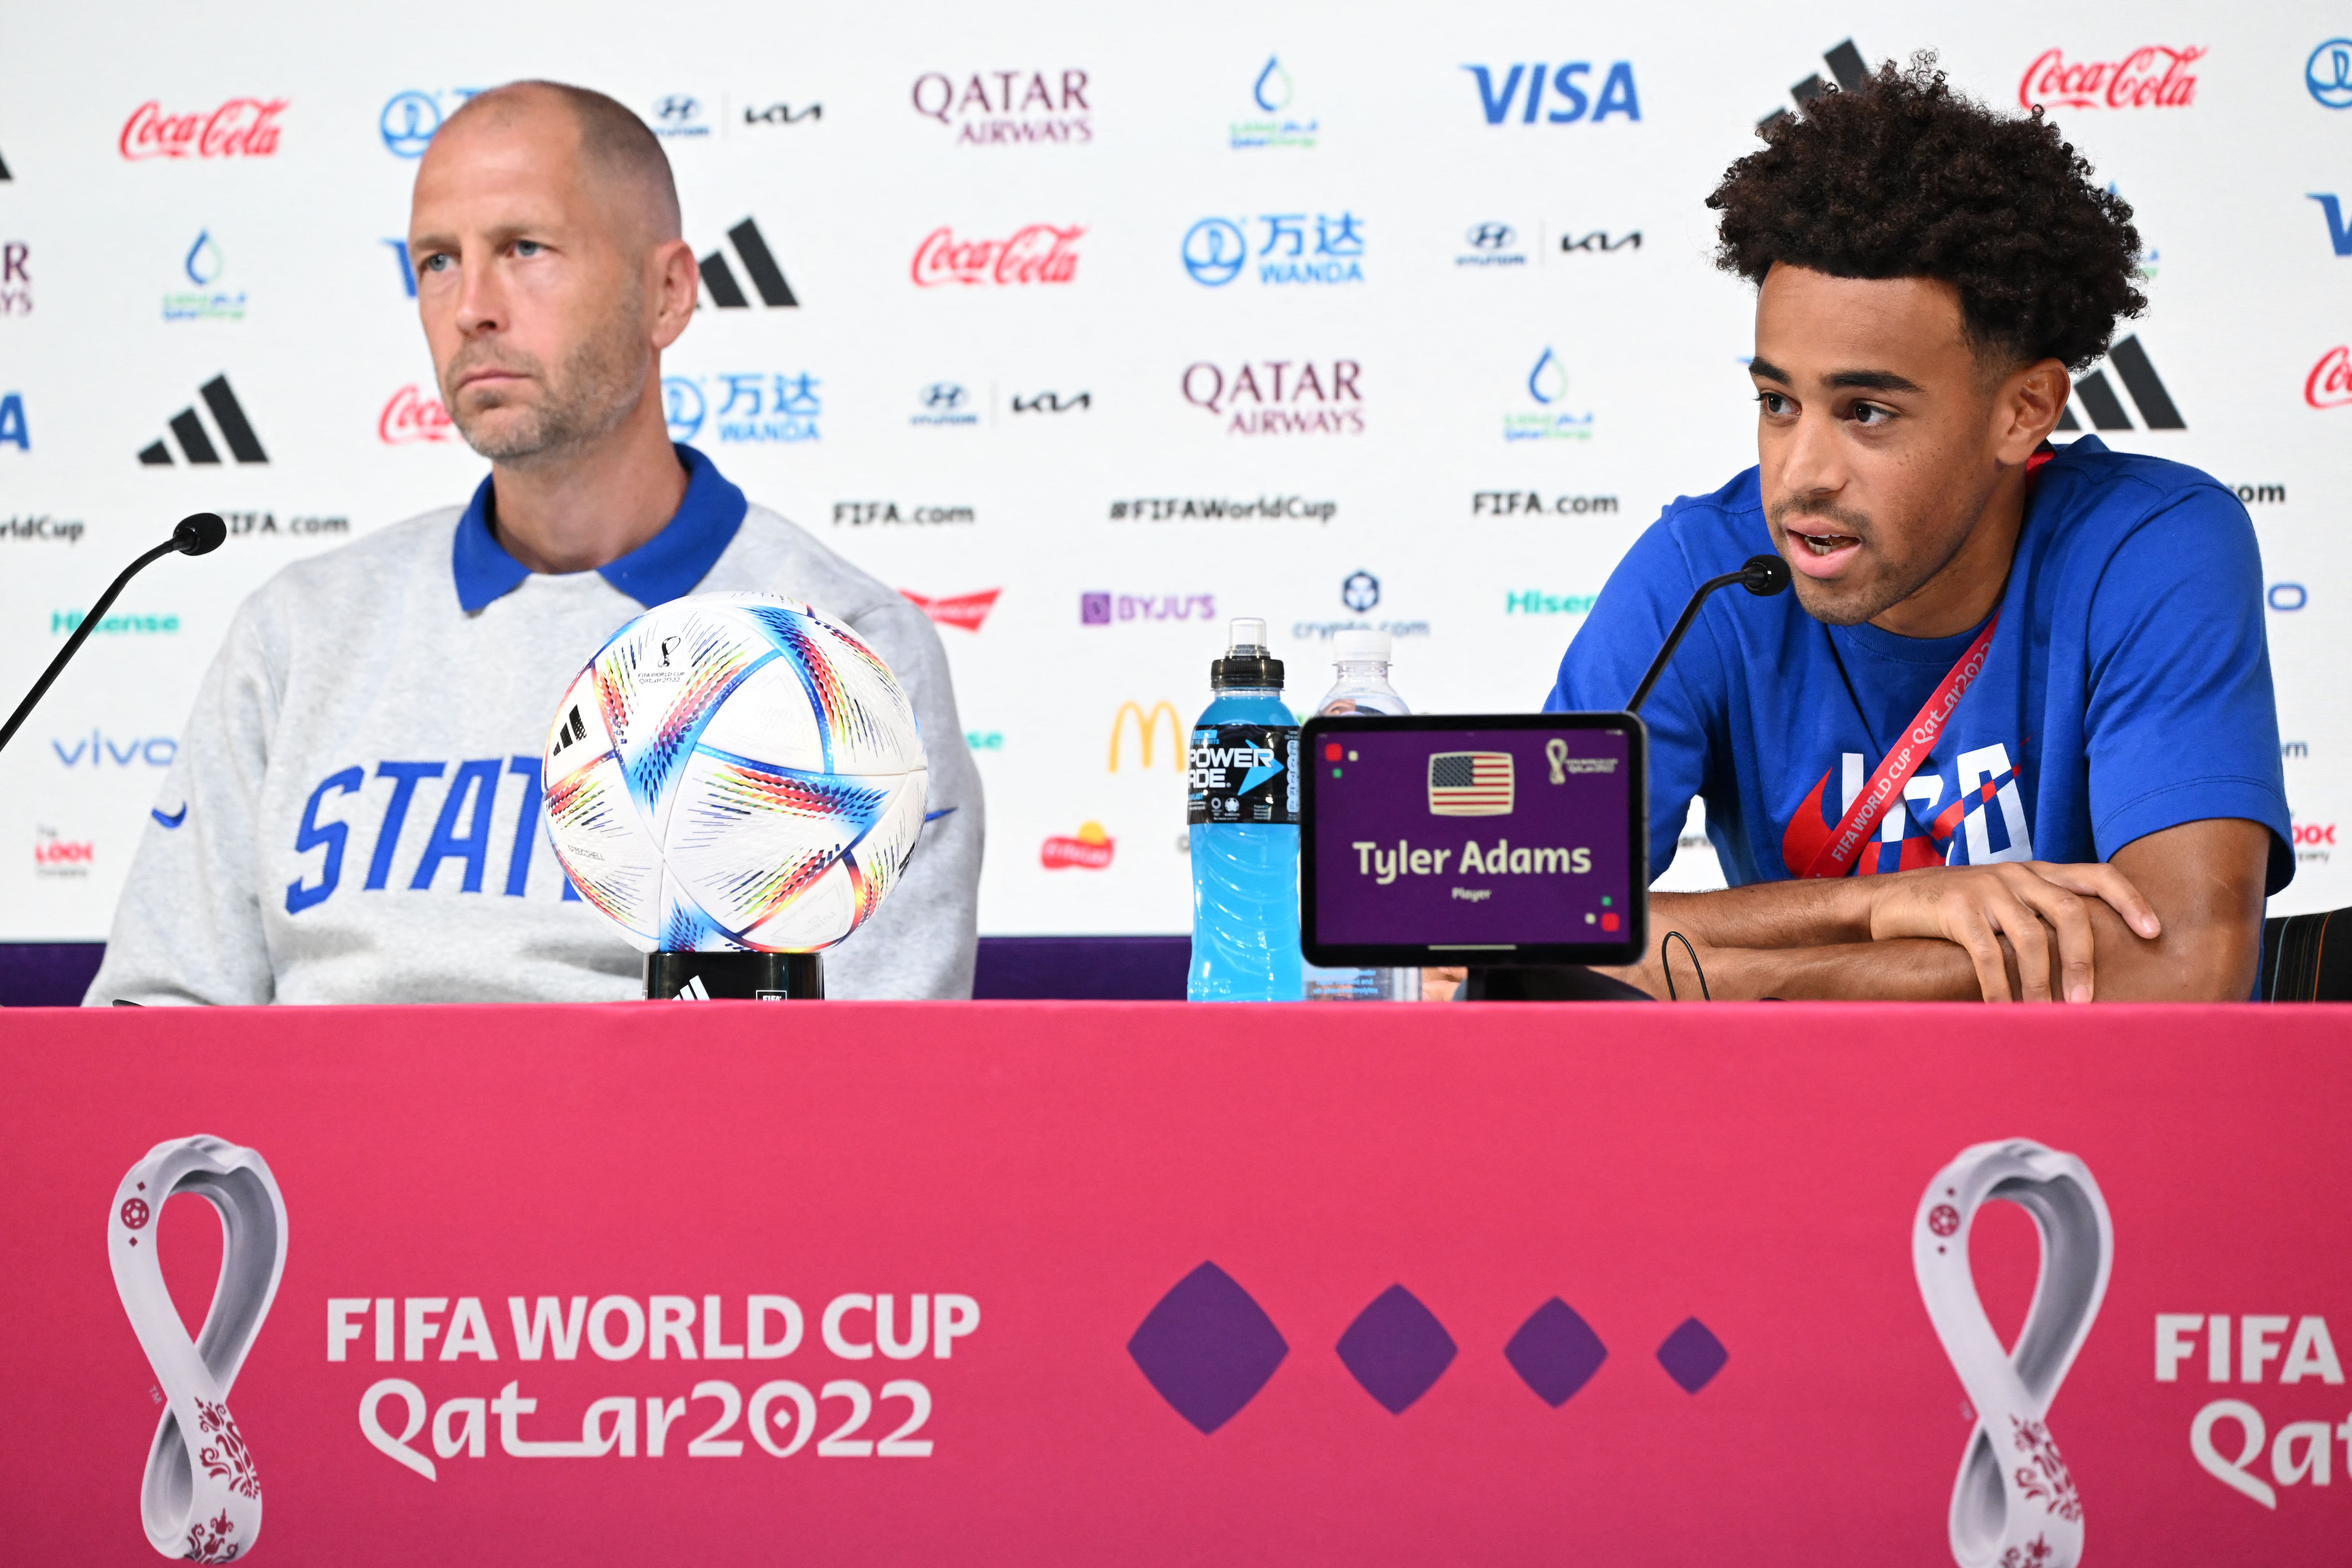 2022 World Cup Ahead of US-Iran match, team faces tense, political press conference